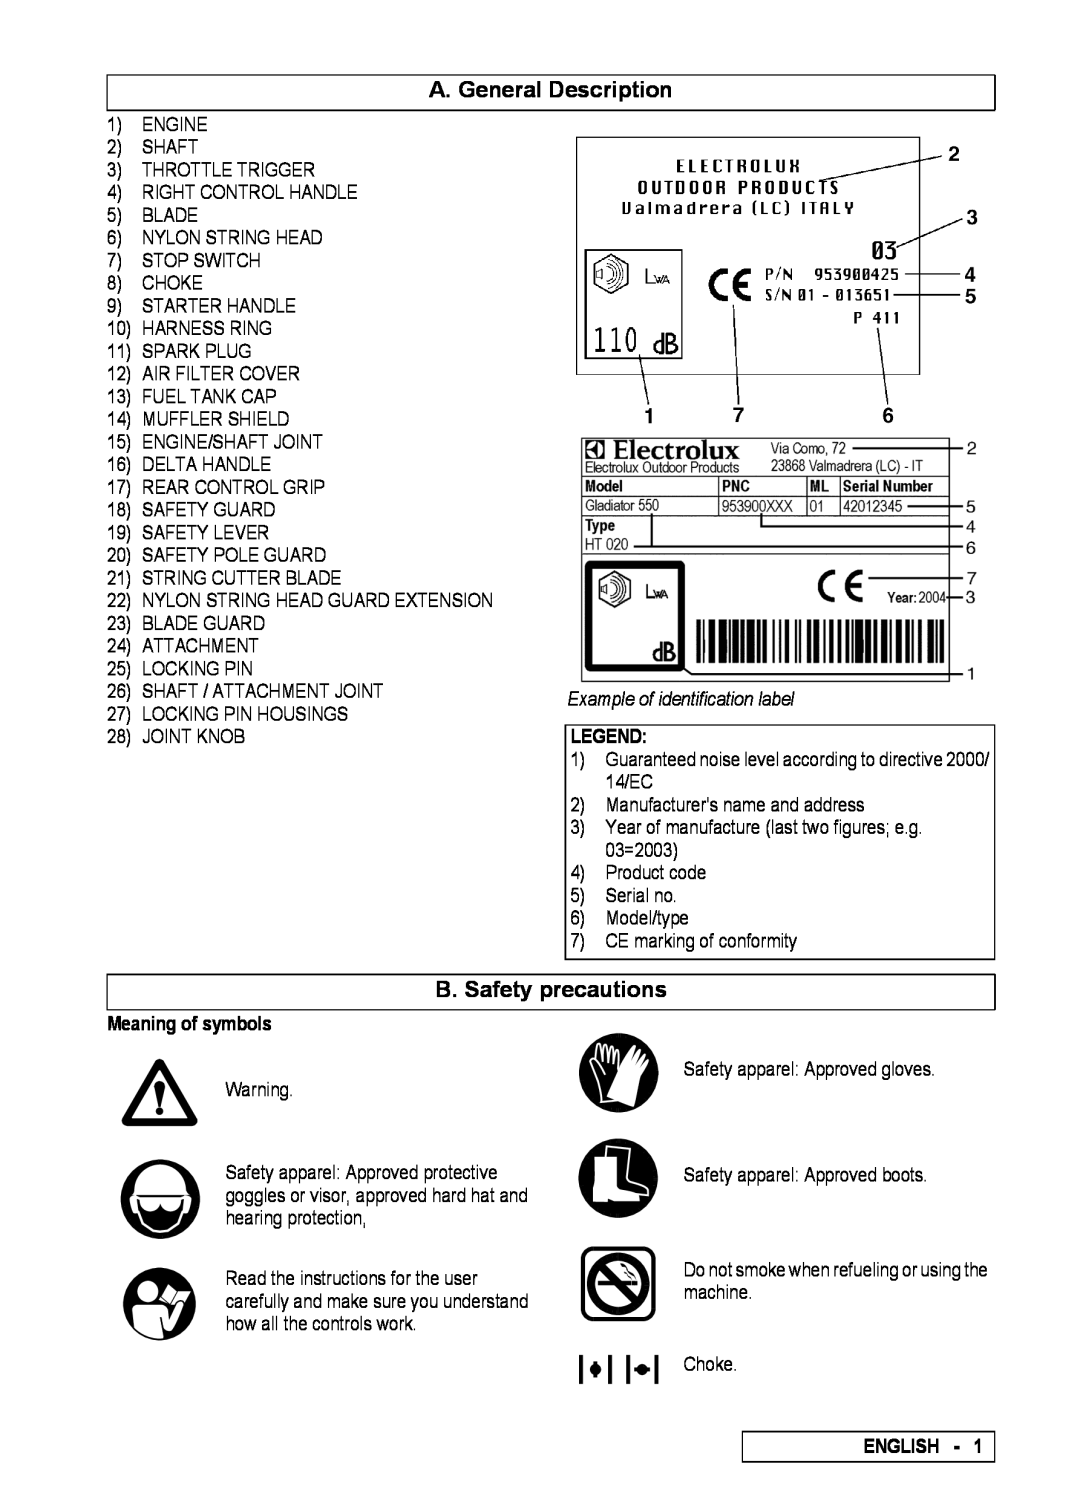 Electrolux 262 A. General Description, B. Safety precautions, Example of identification label, Meaning of symbols, English 